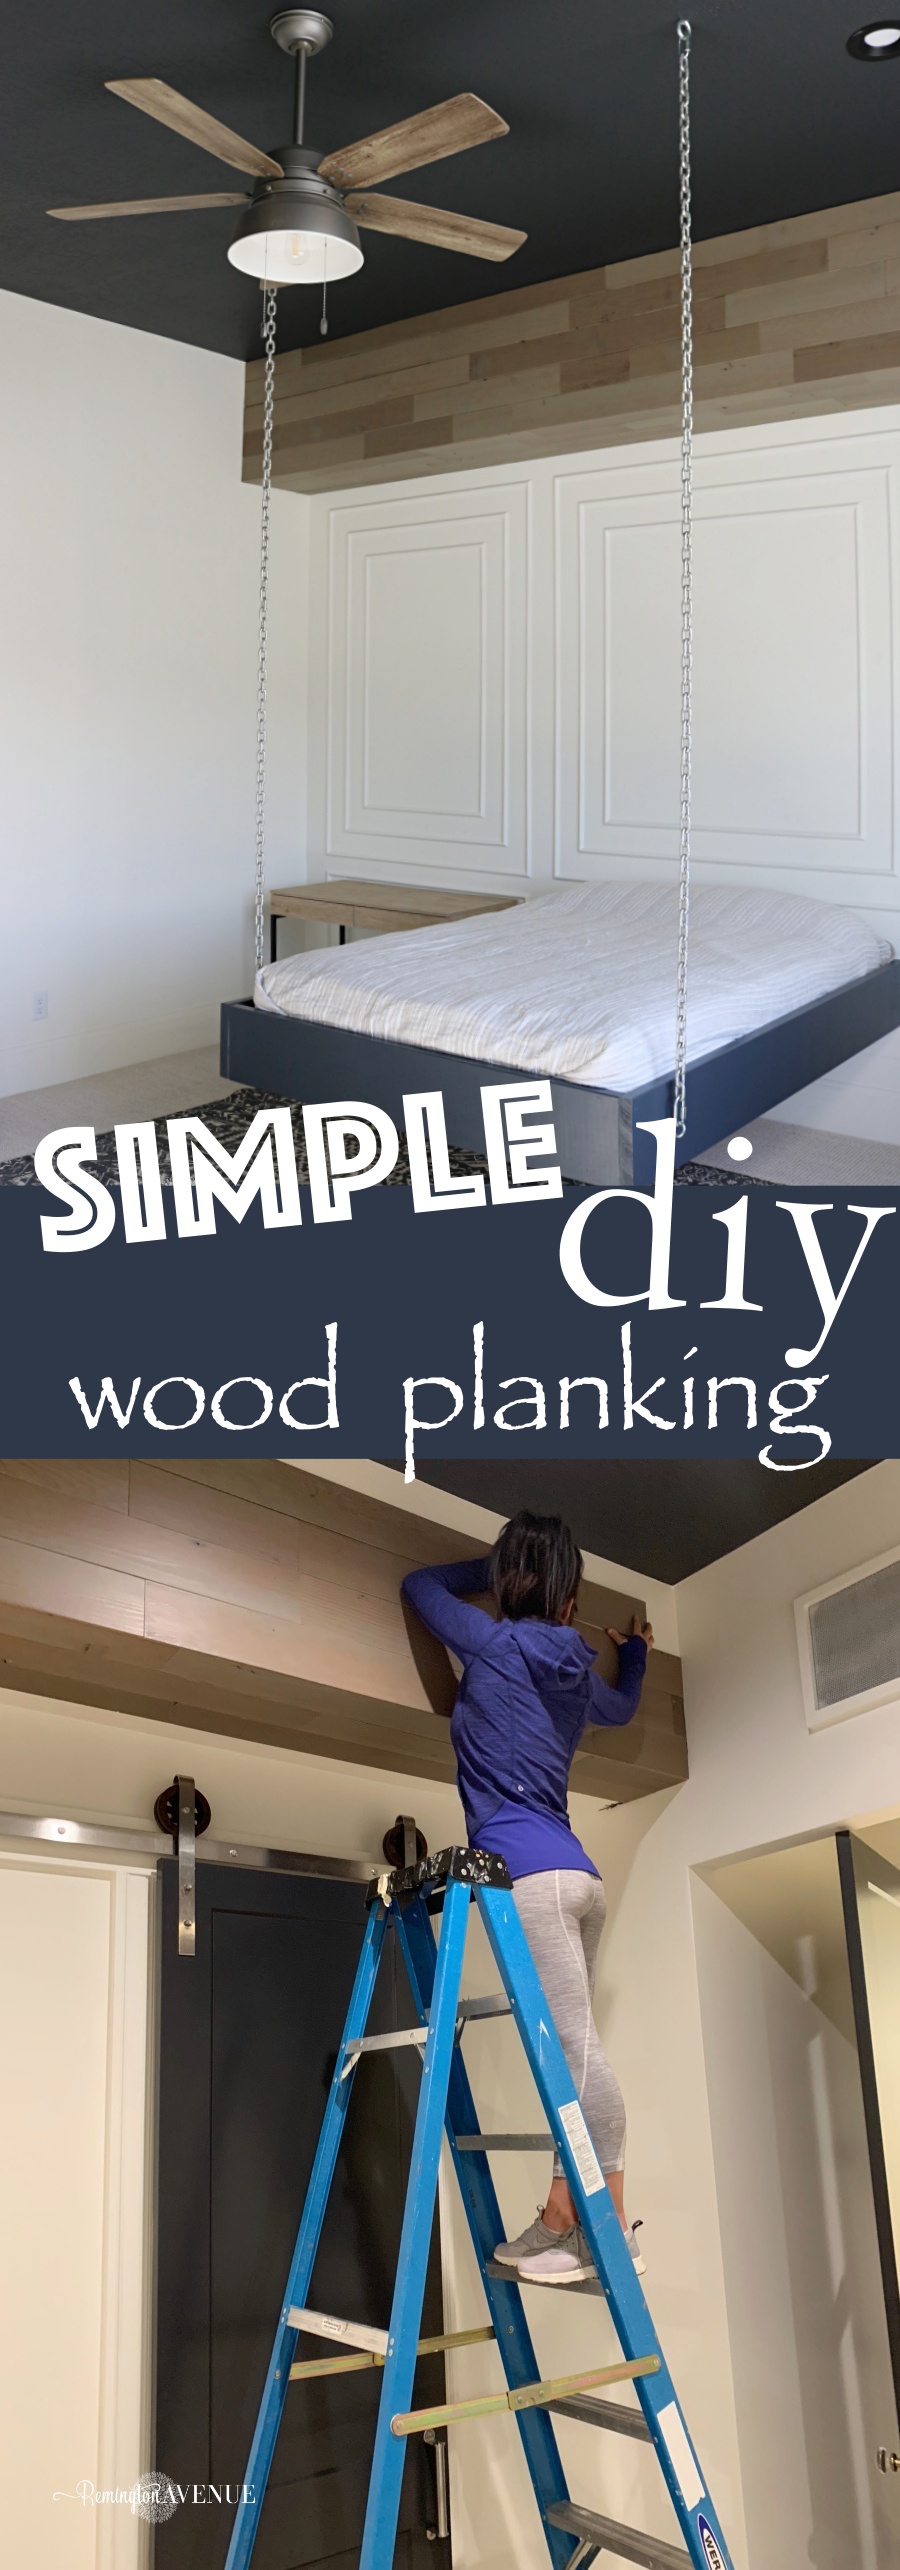 diy boys bedroom with wood accents - stikwood accent